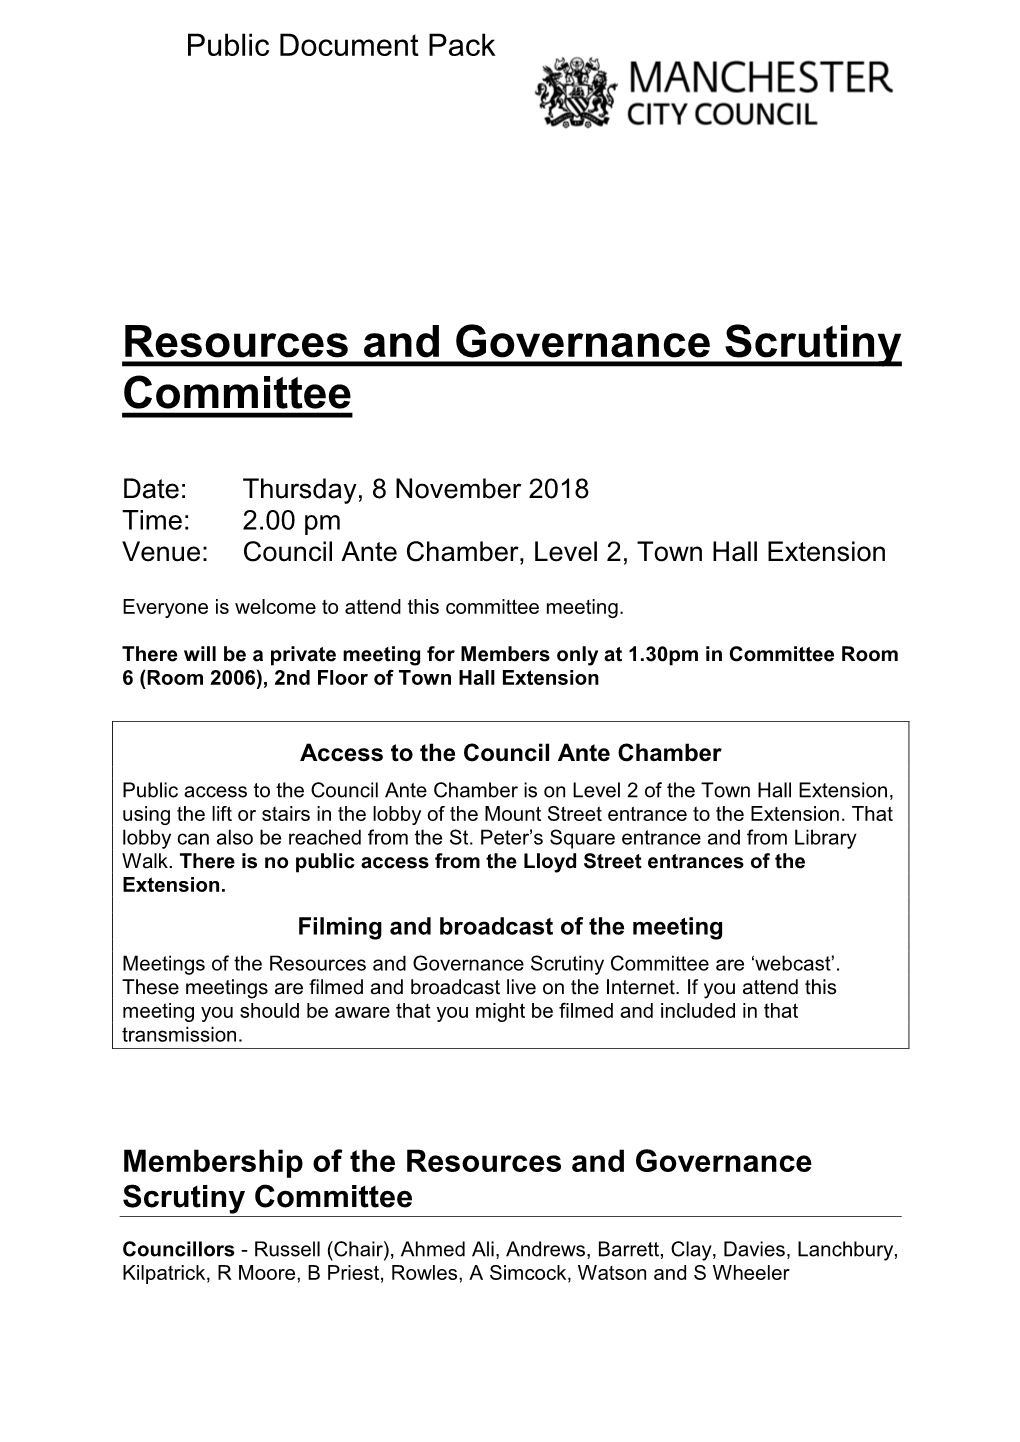 (Public Pack)Agenda Document for Resources and Governance